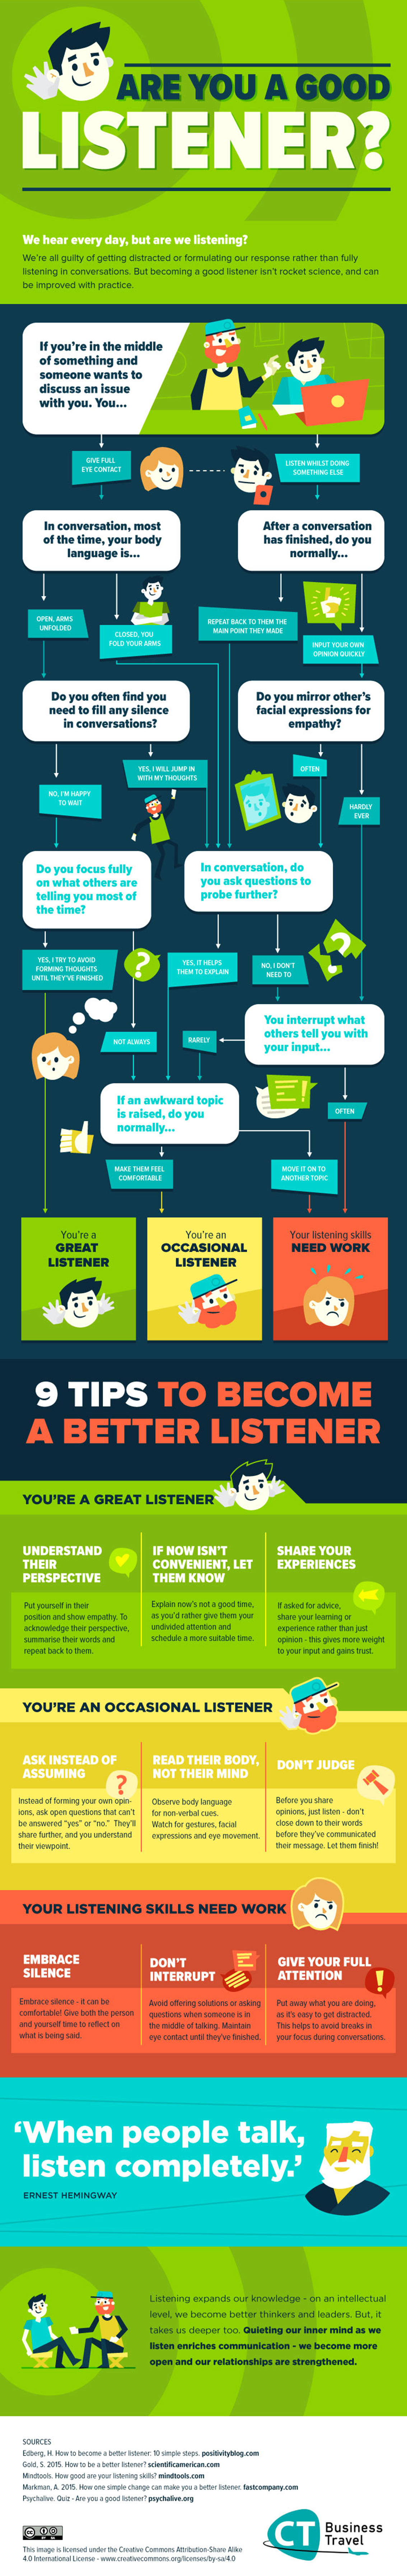 Are you a Good Listener - Self improvement Infographic